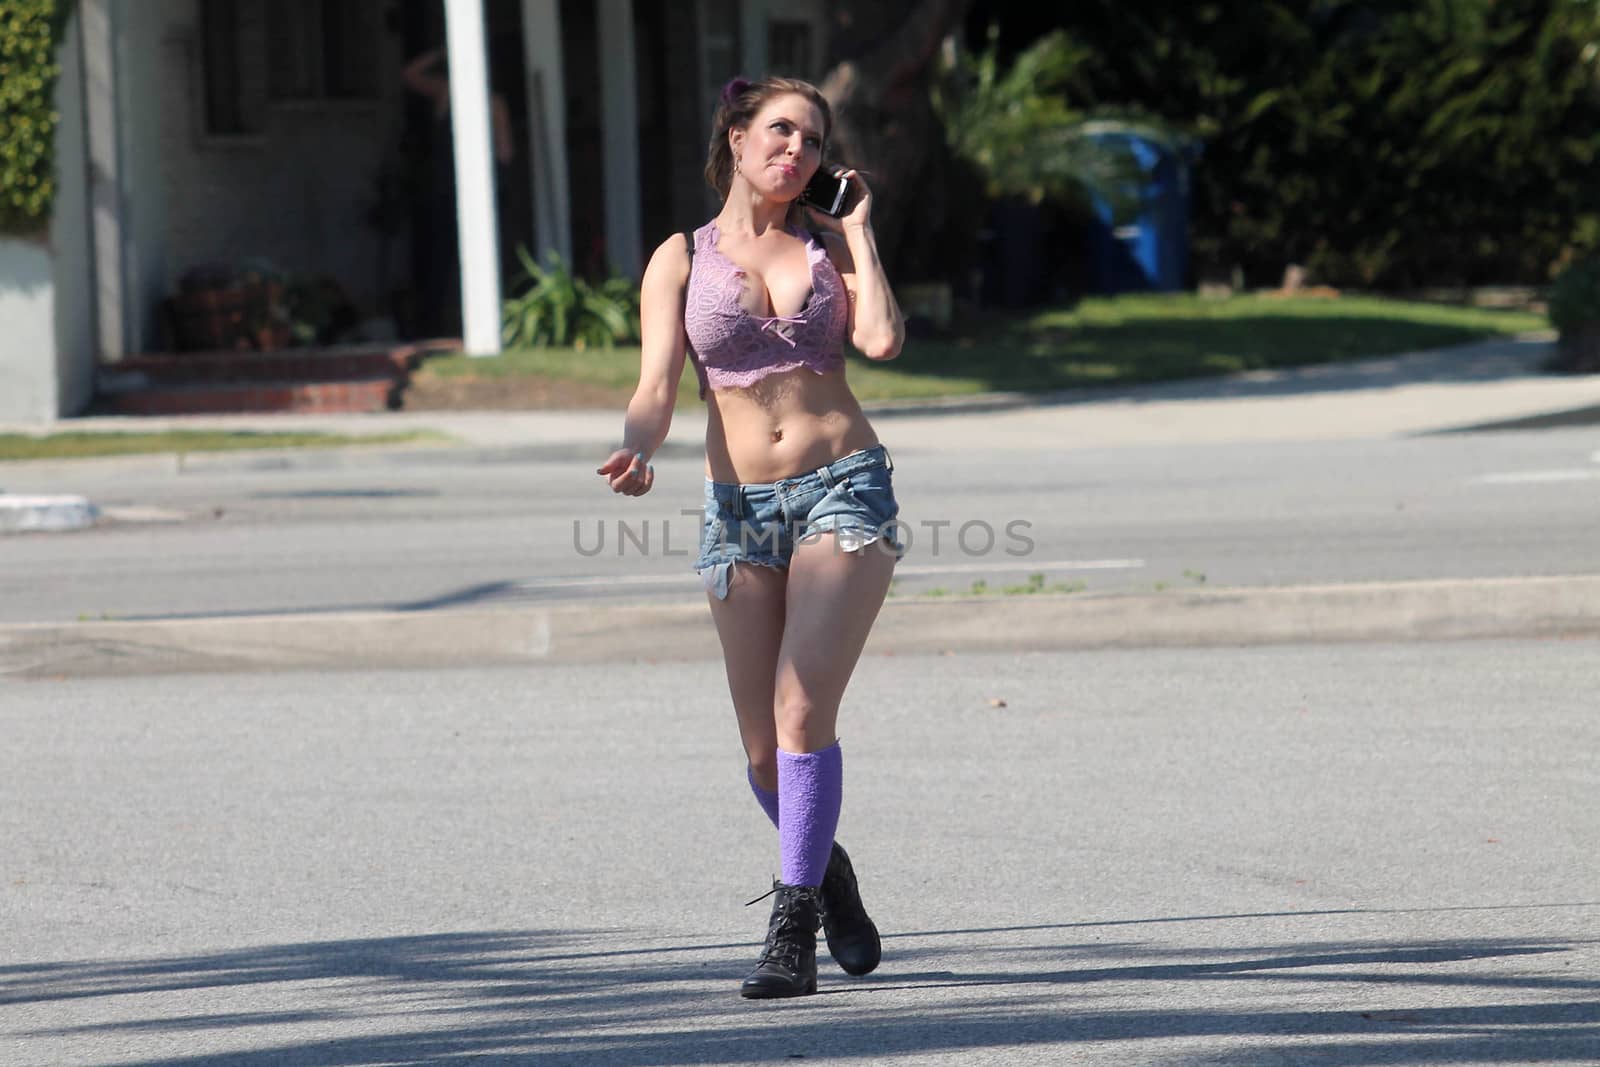 Erika Jordan the Playboy TV Host is spotted out and about wearing tiny shorts, Los Angeles, CA 05-15-17/ImageCollect by ImageCollect